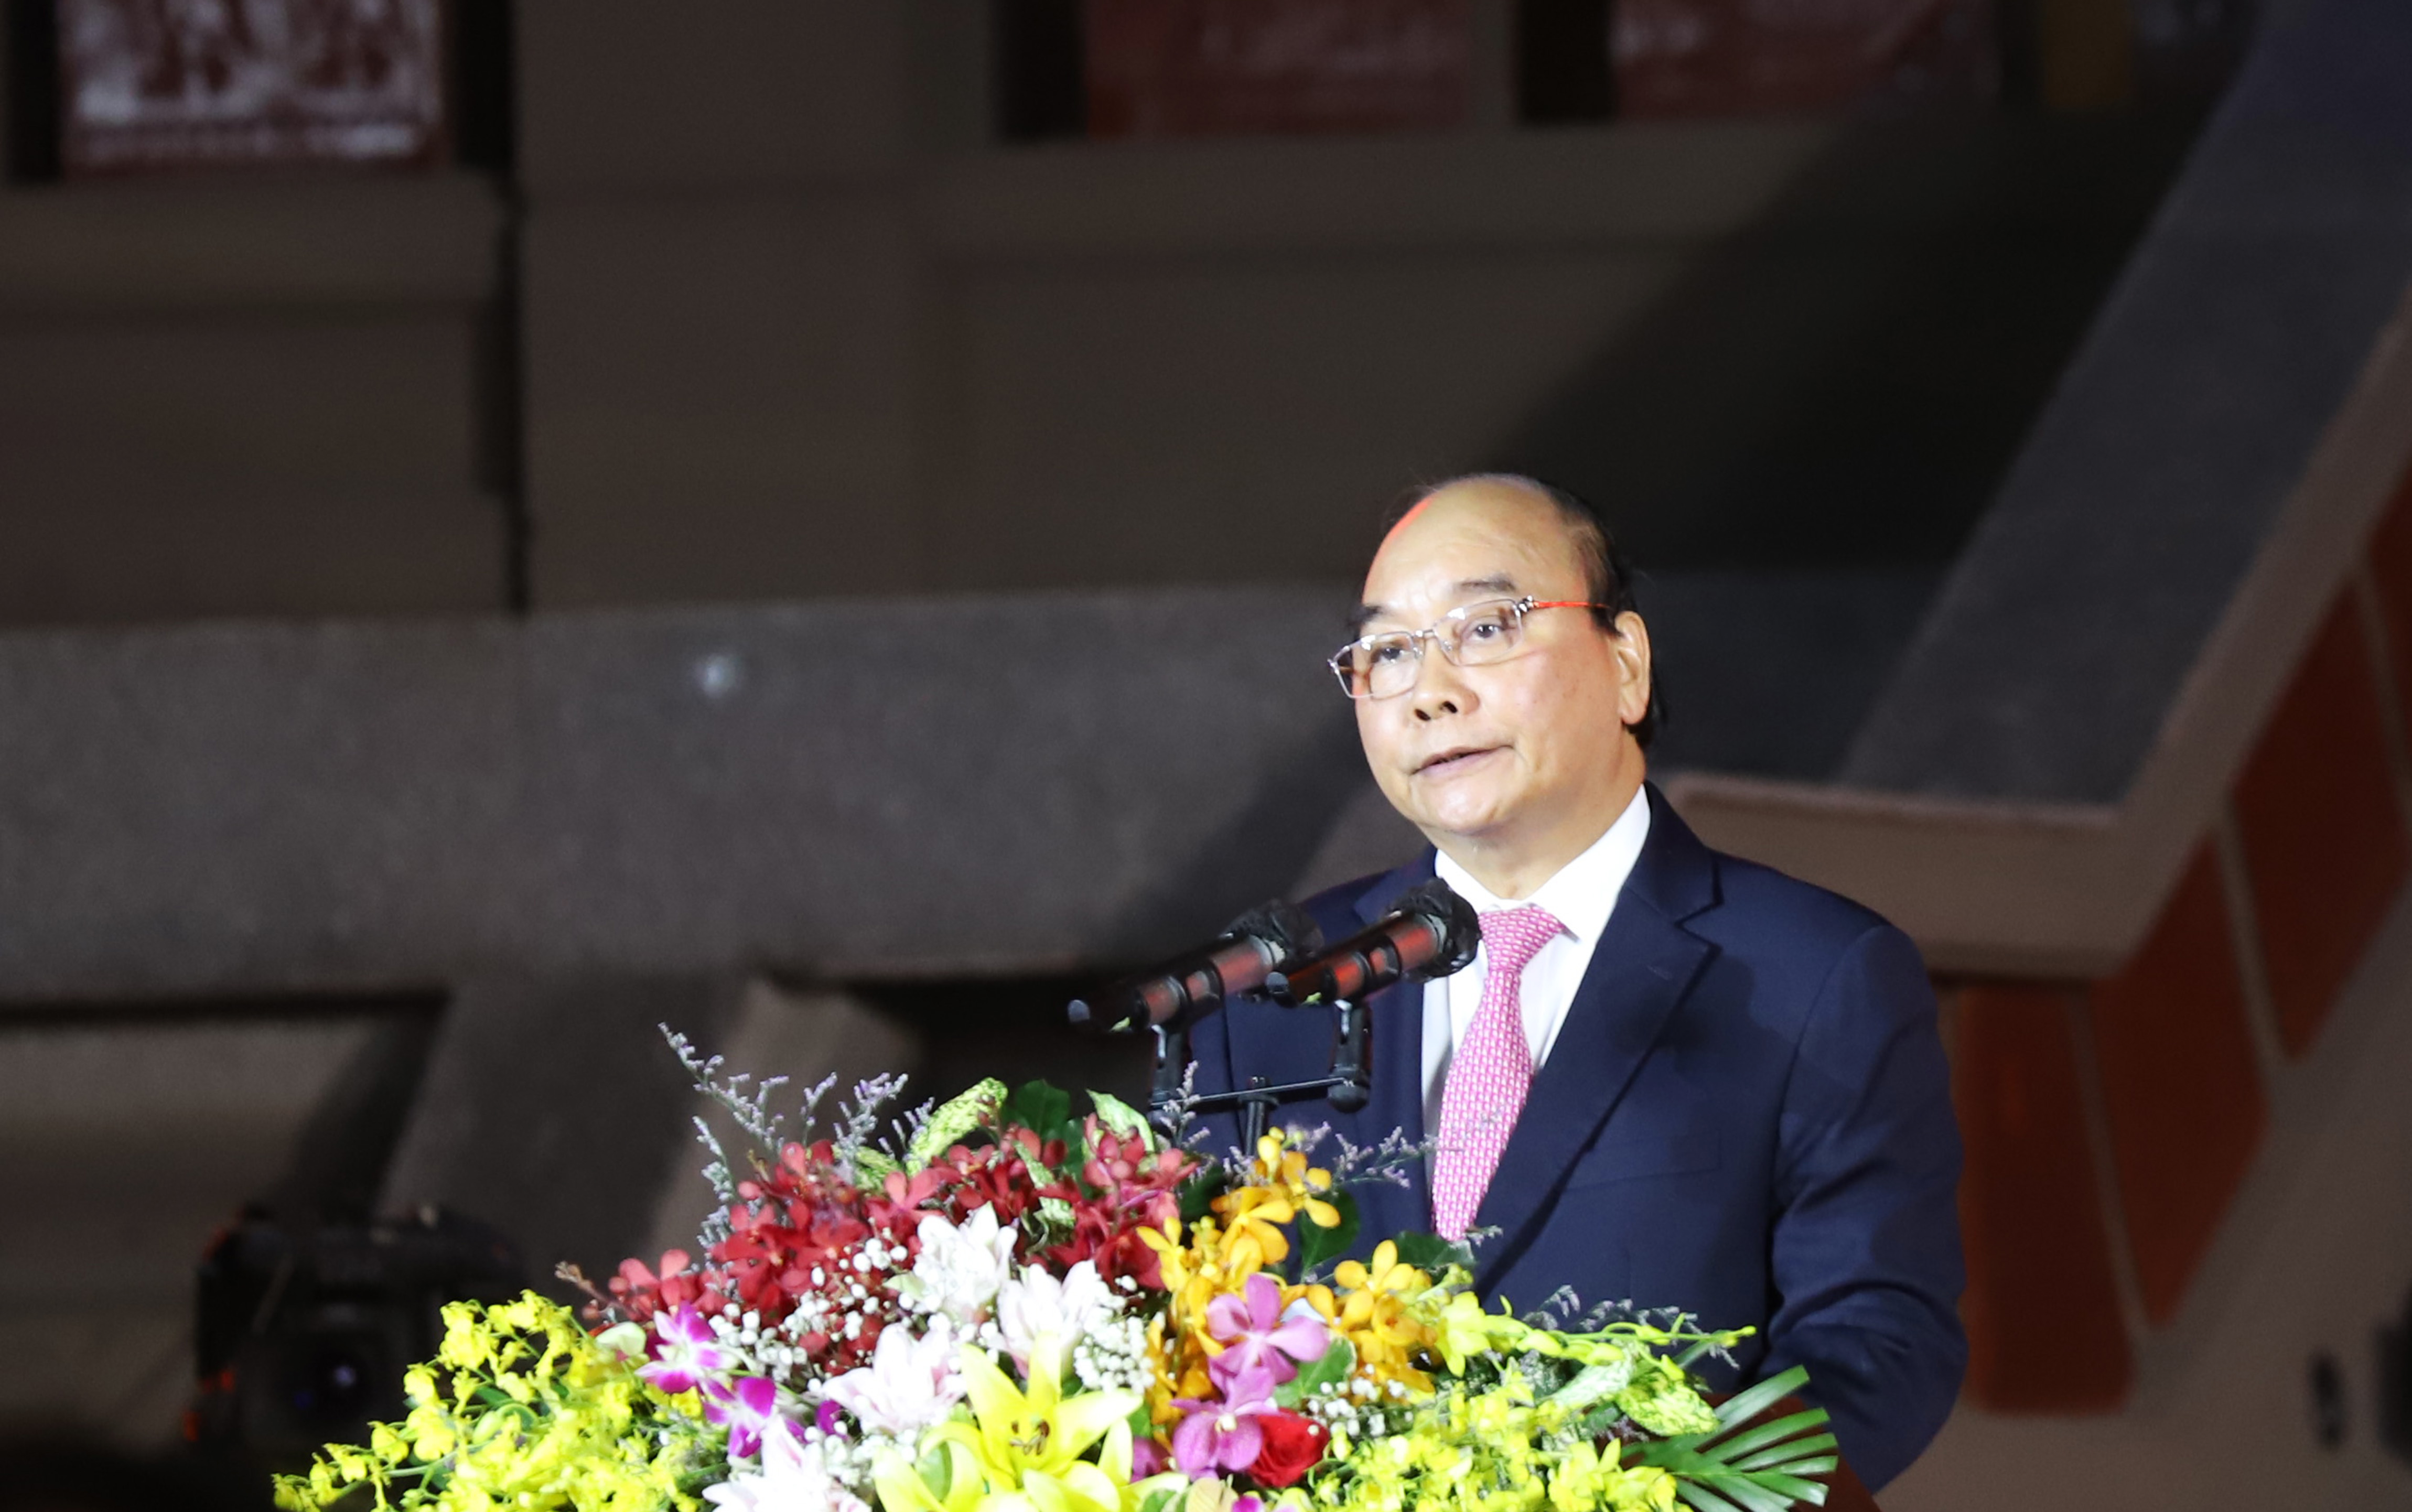 Vietnamese State President Nguyen Xuan Phuc speaks at the inauguration ceremony of the Hung Kings Temple in Can Tho City, Vietnam, April 6, 2022. Photo: Chi Quoc / Tuoi Tre